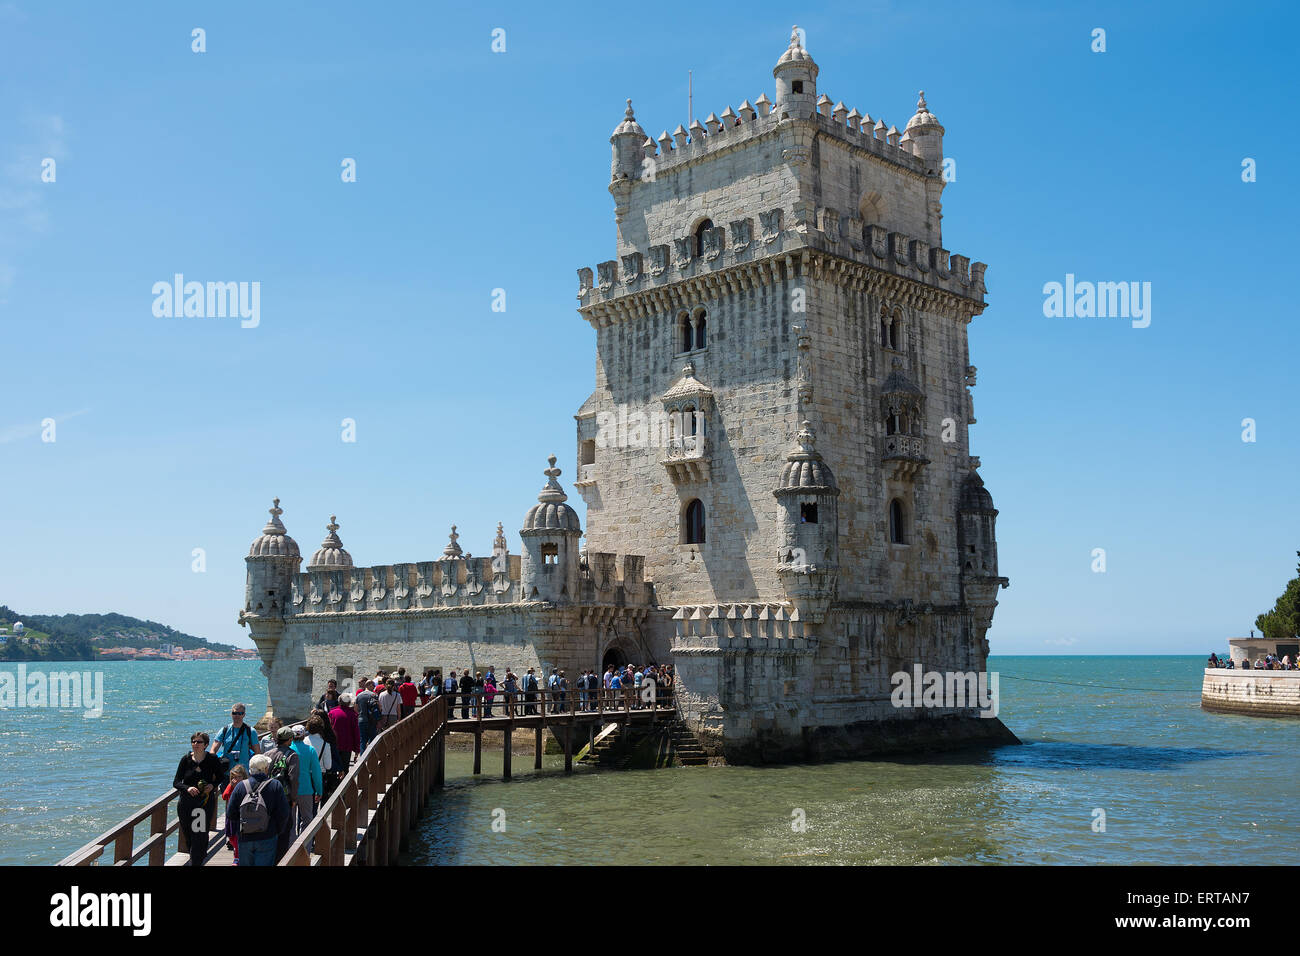 Belem Tower in Lisbon  Portugal against a blue sky Stock Photo